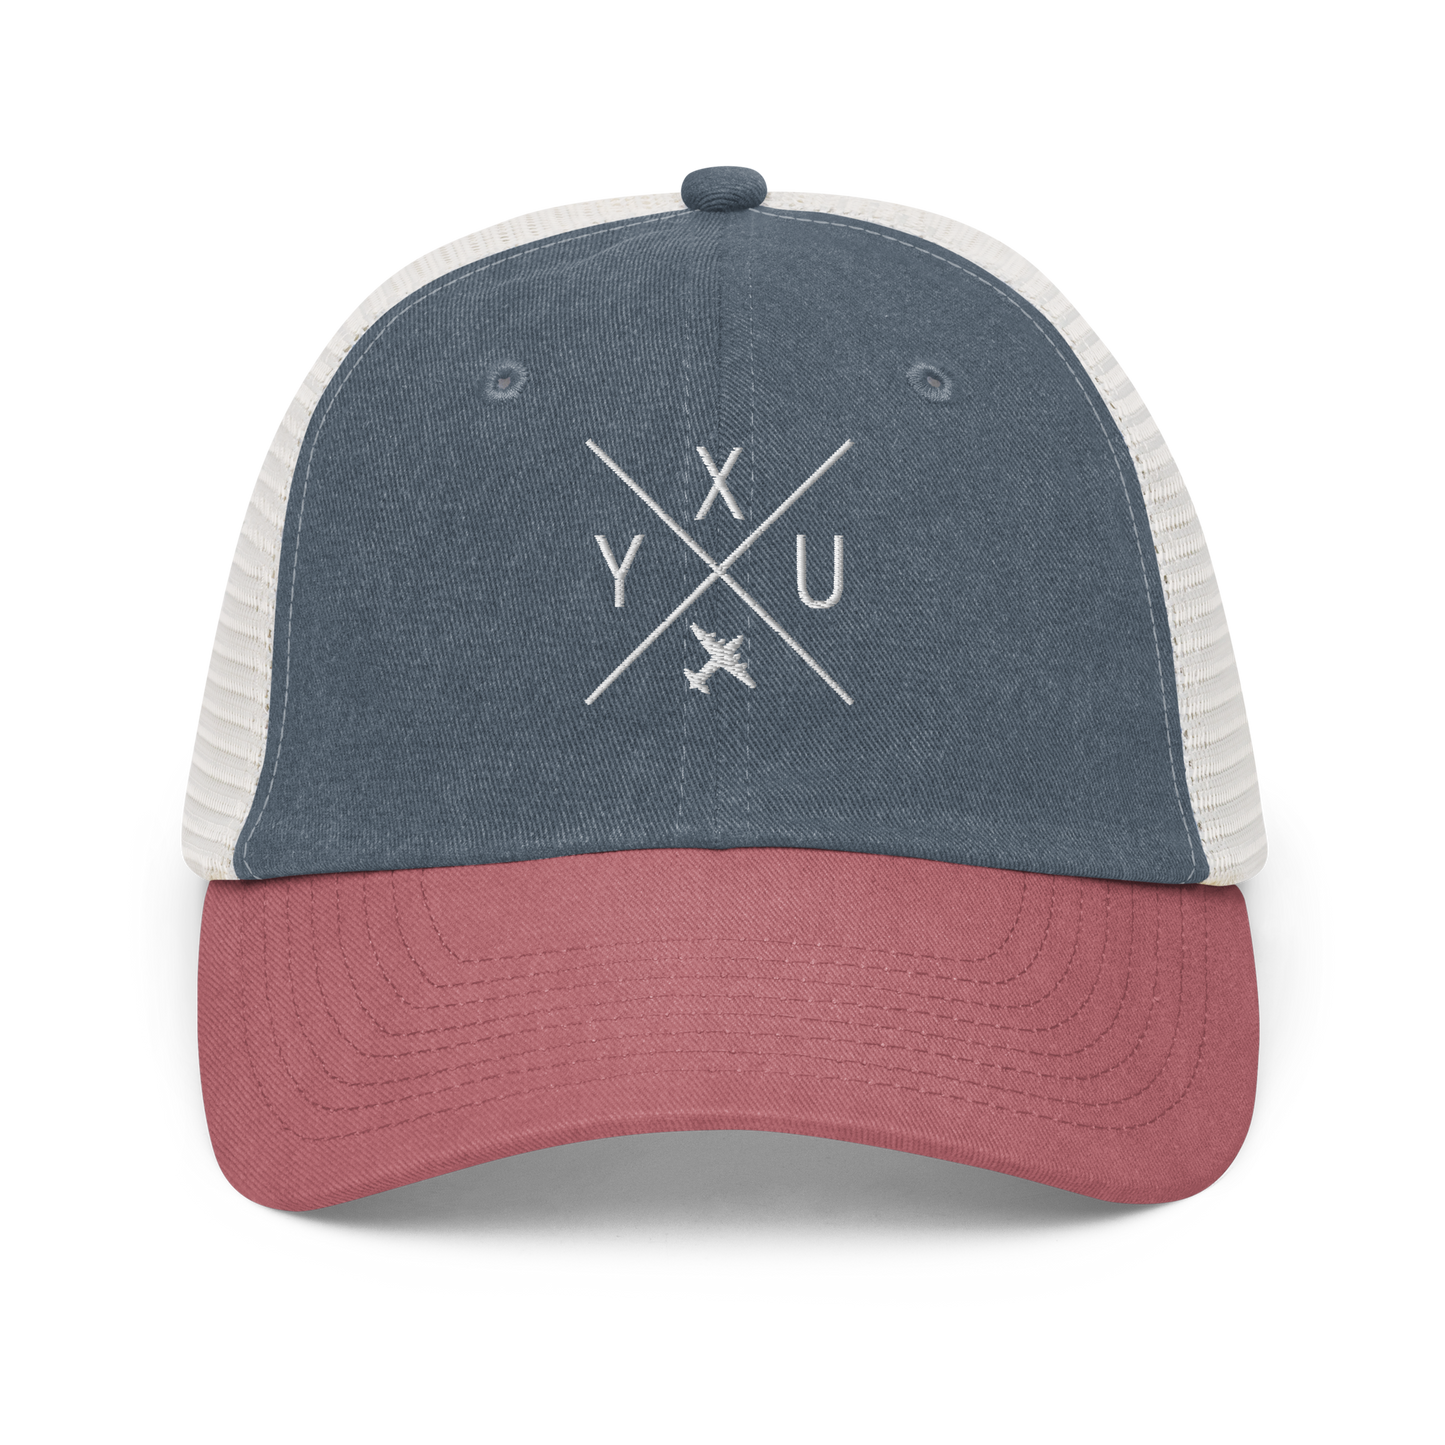 YHM Designs - YXU London Pigment-Dyed Trucker Cap - Crossed-X Design with Airport Code and Vintage Propliner - White Embroidery - Image 12